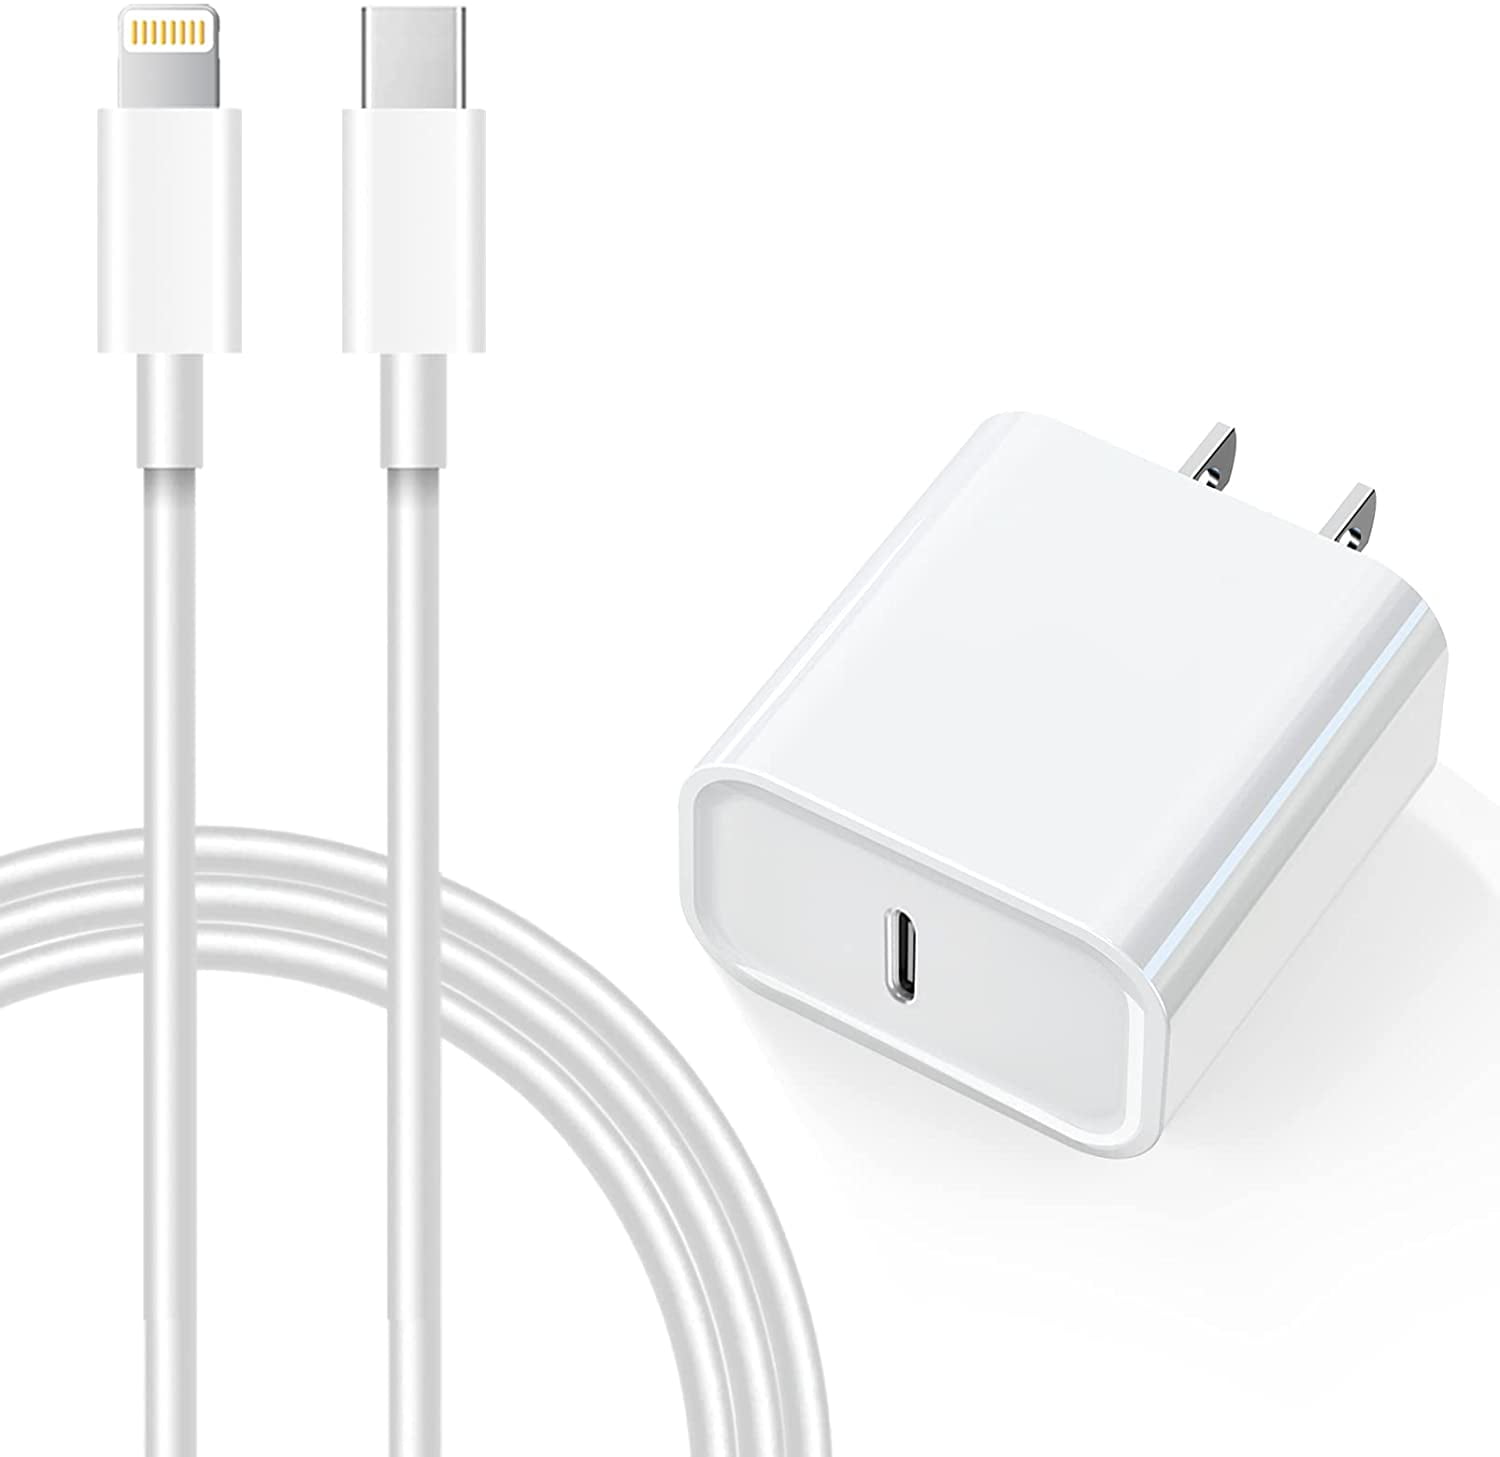 iPhone 13 12 Fast Charger 【Apple MFi Certified】 USB C Wall Charger Super Quick 20W PD Adapter with 6FT Charging Cable Compatible with iPhone 13/12/11 Pro Max,Mini,Pro/XR/iPad 2-Pack 